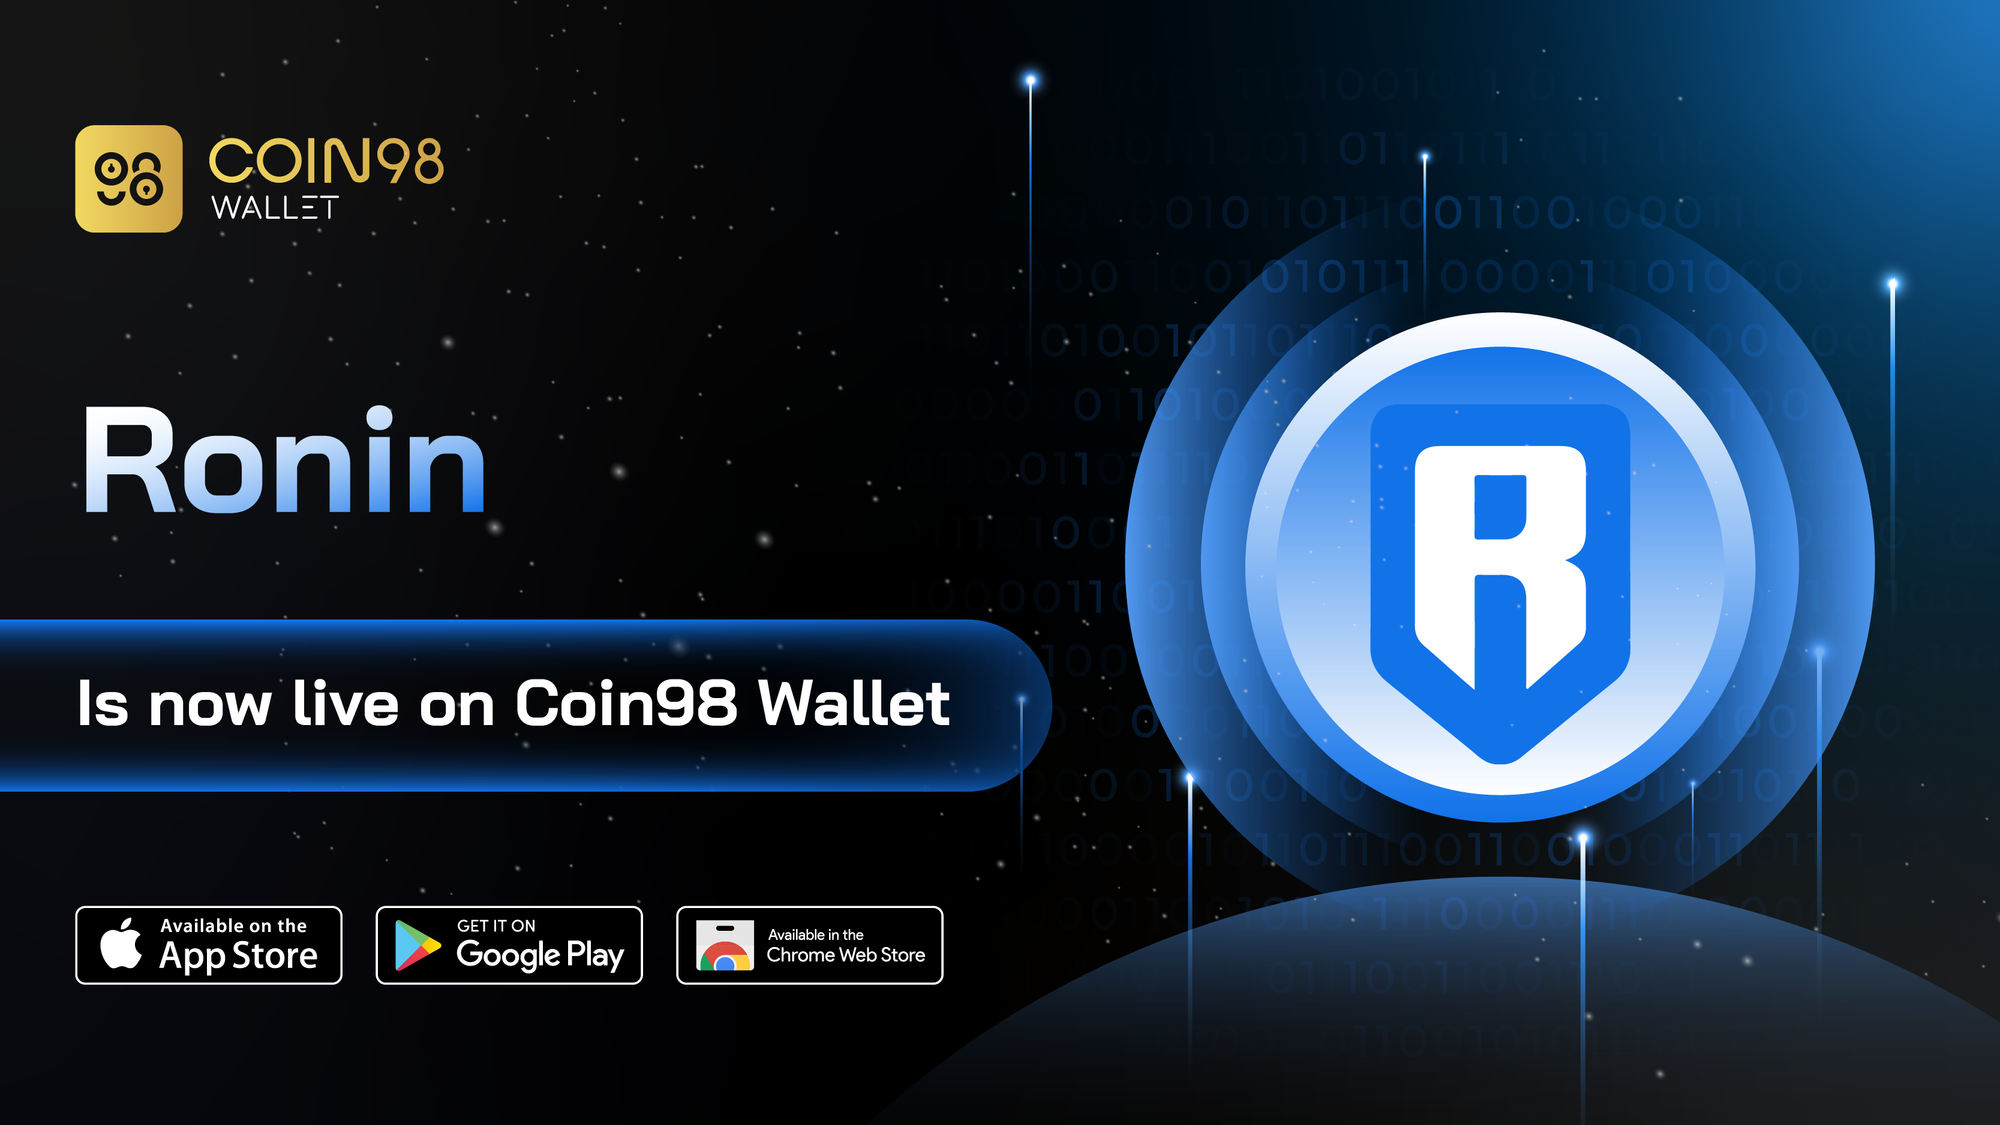 Coin98 Wallet integrates Ronin for the blockchain gaming industry scalability